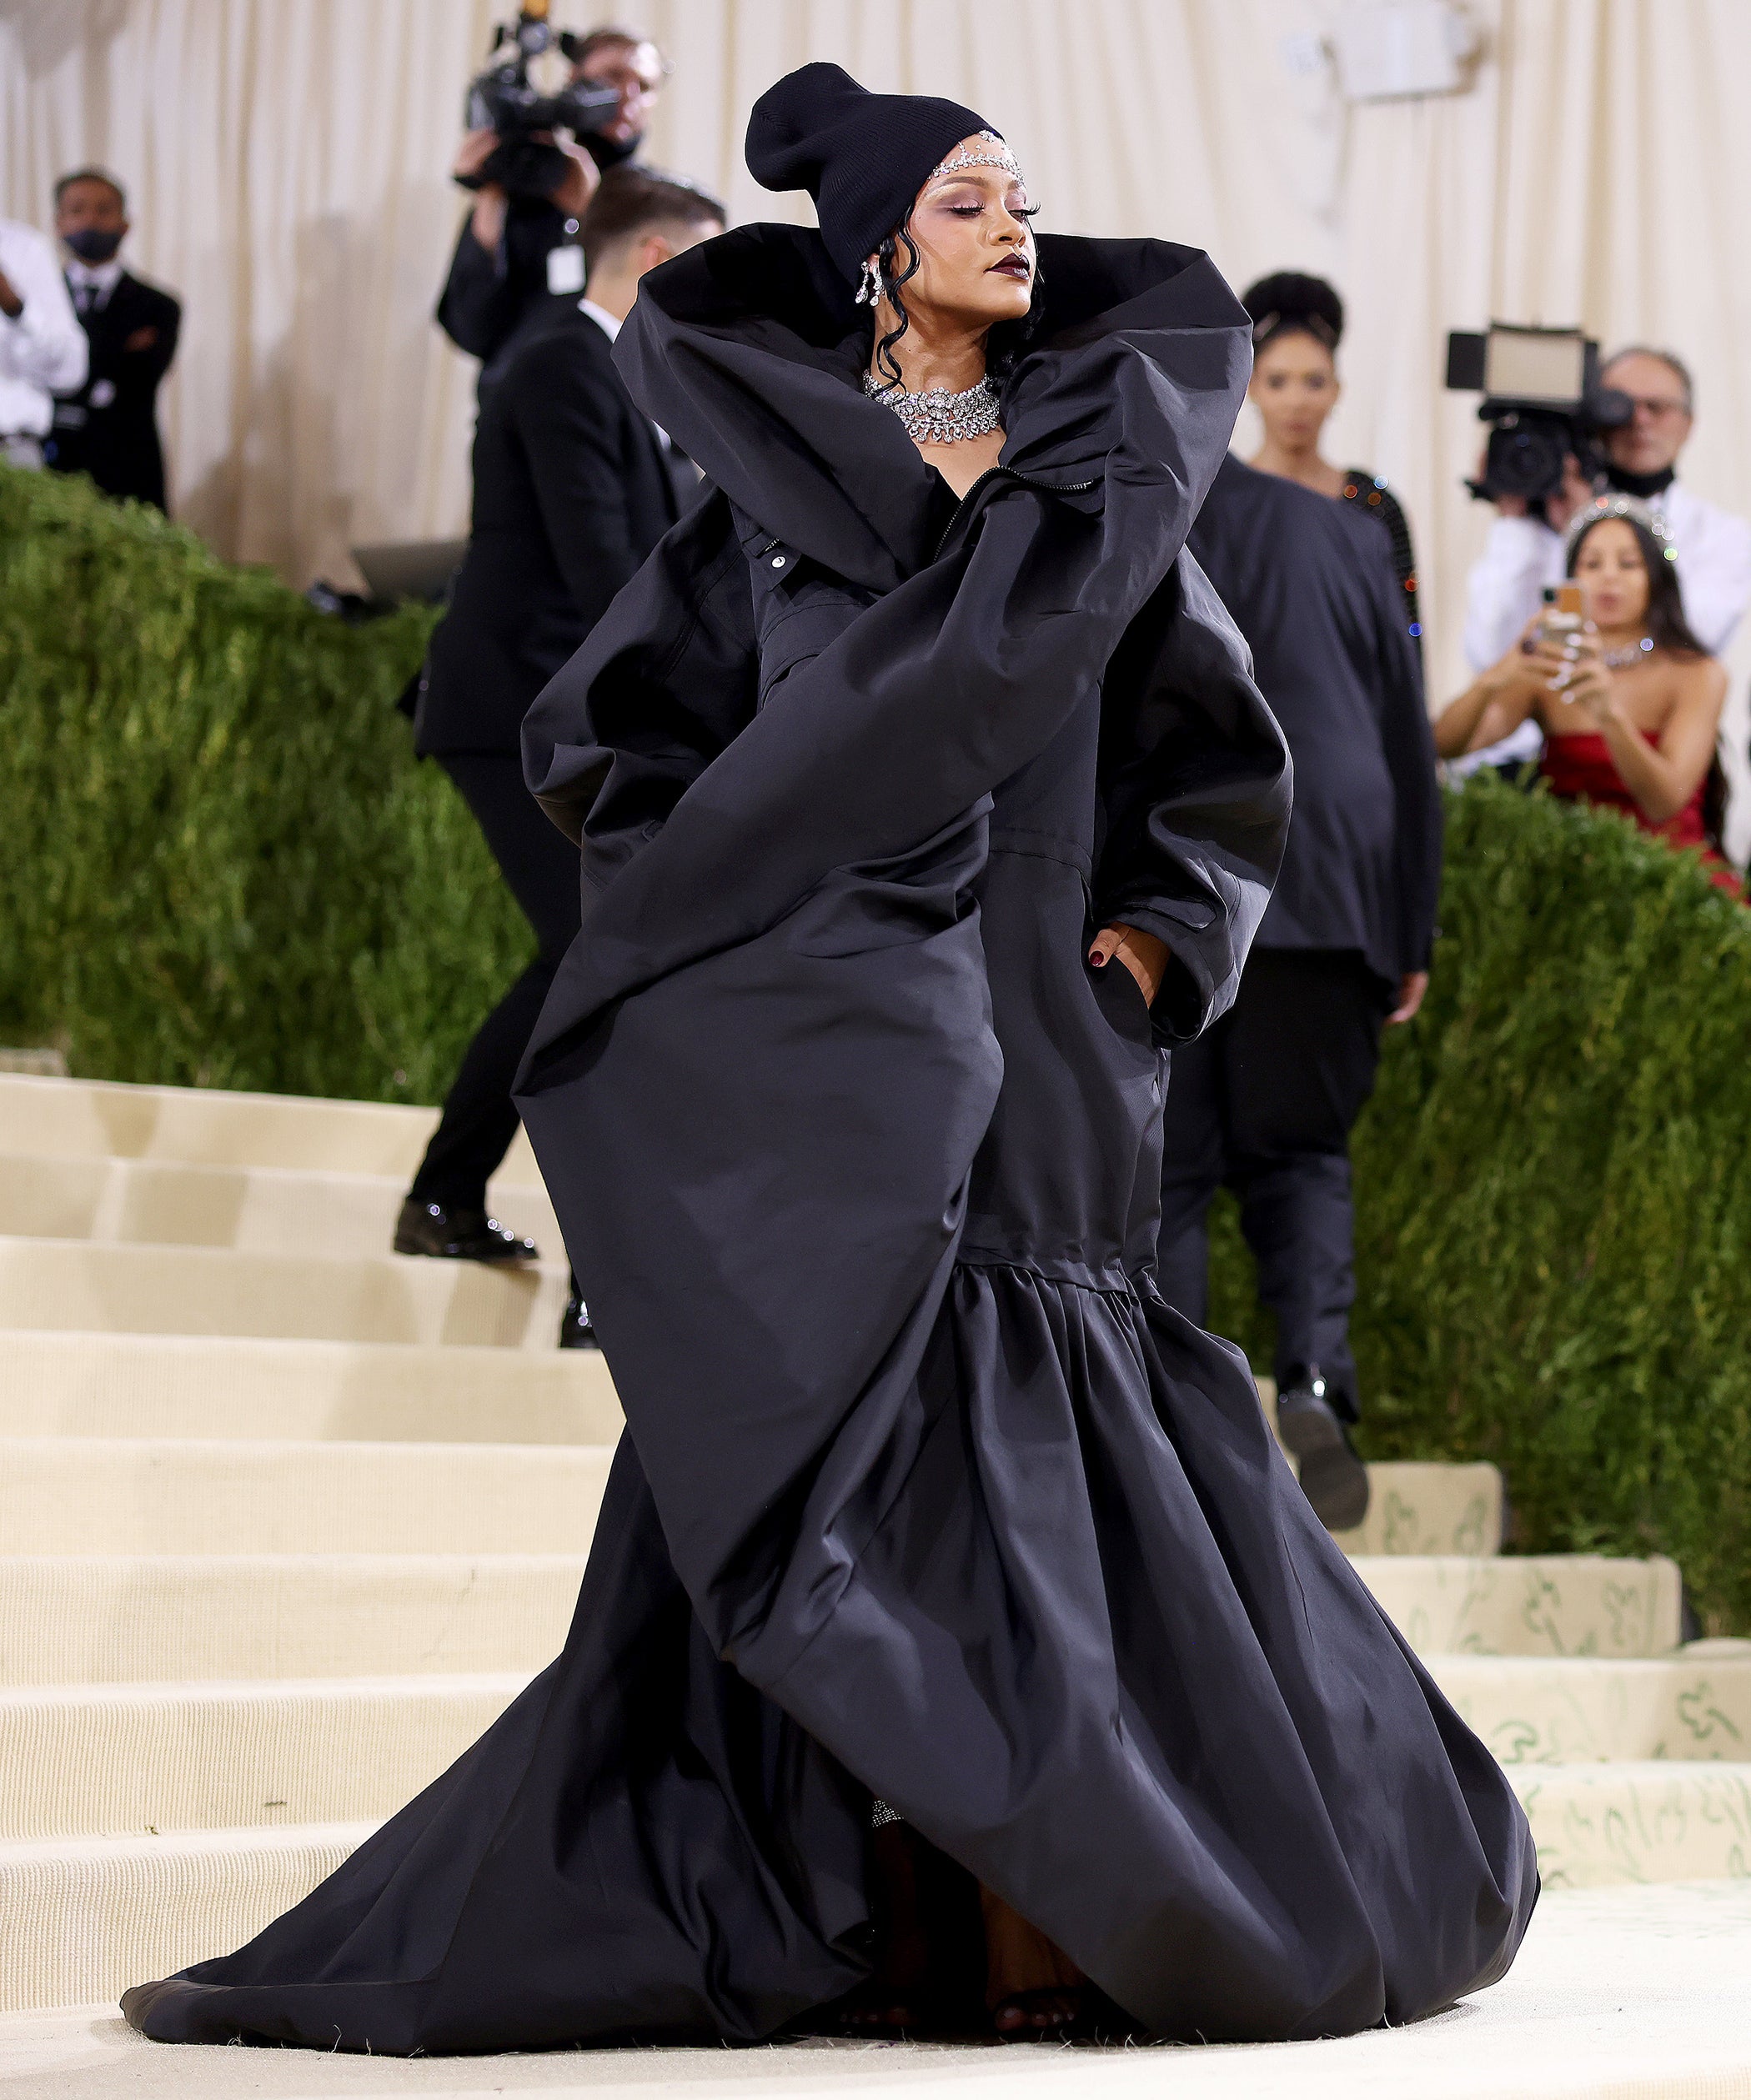 Met Gala 2021: All You Need to Know